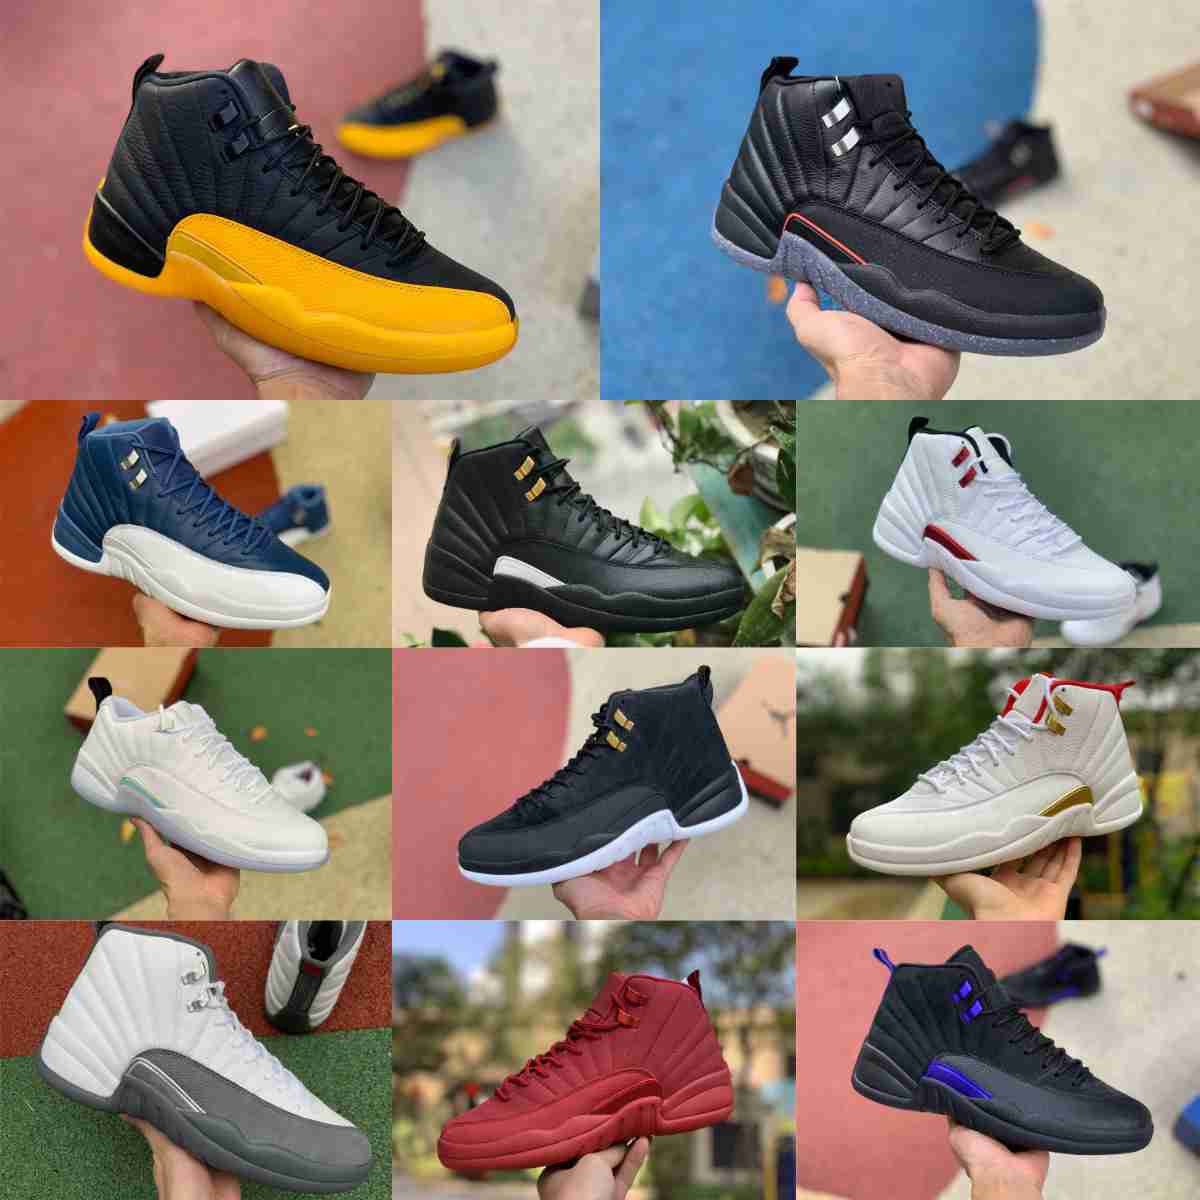 

2023 Jumpman Utility Grind 12 12s Mens High Basketball Shoes Twist Gold Indigo Taxi Fiba Gamma Blue Flu Game Dark Concord Royalty OVO White The Master Trainer Sneakers, Please contact us